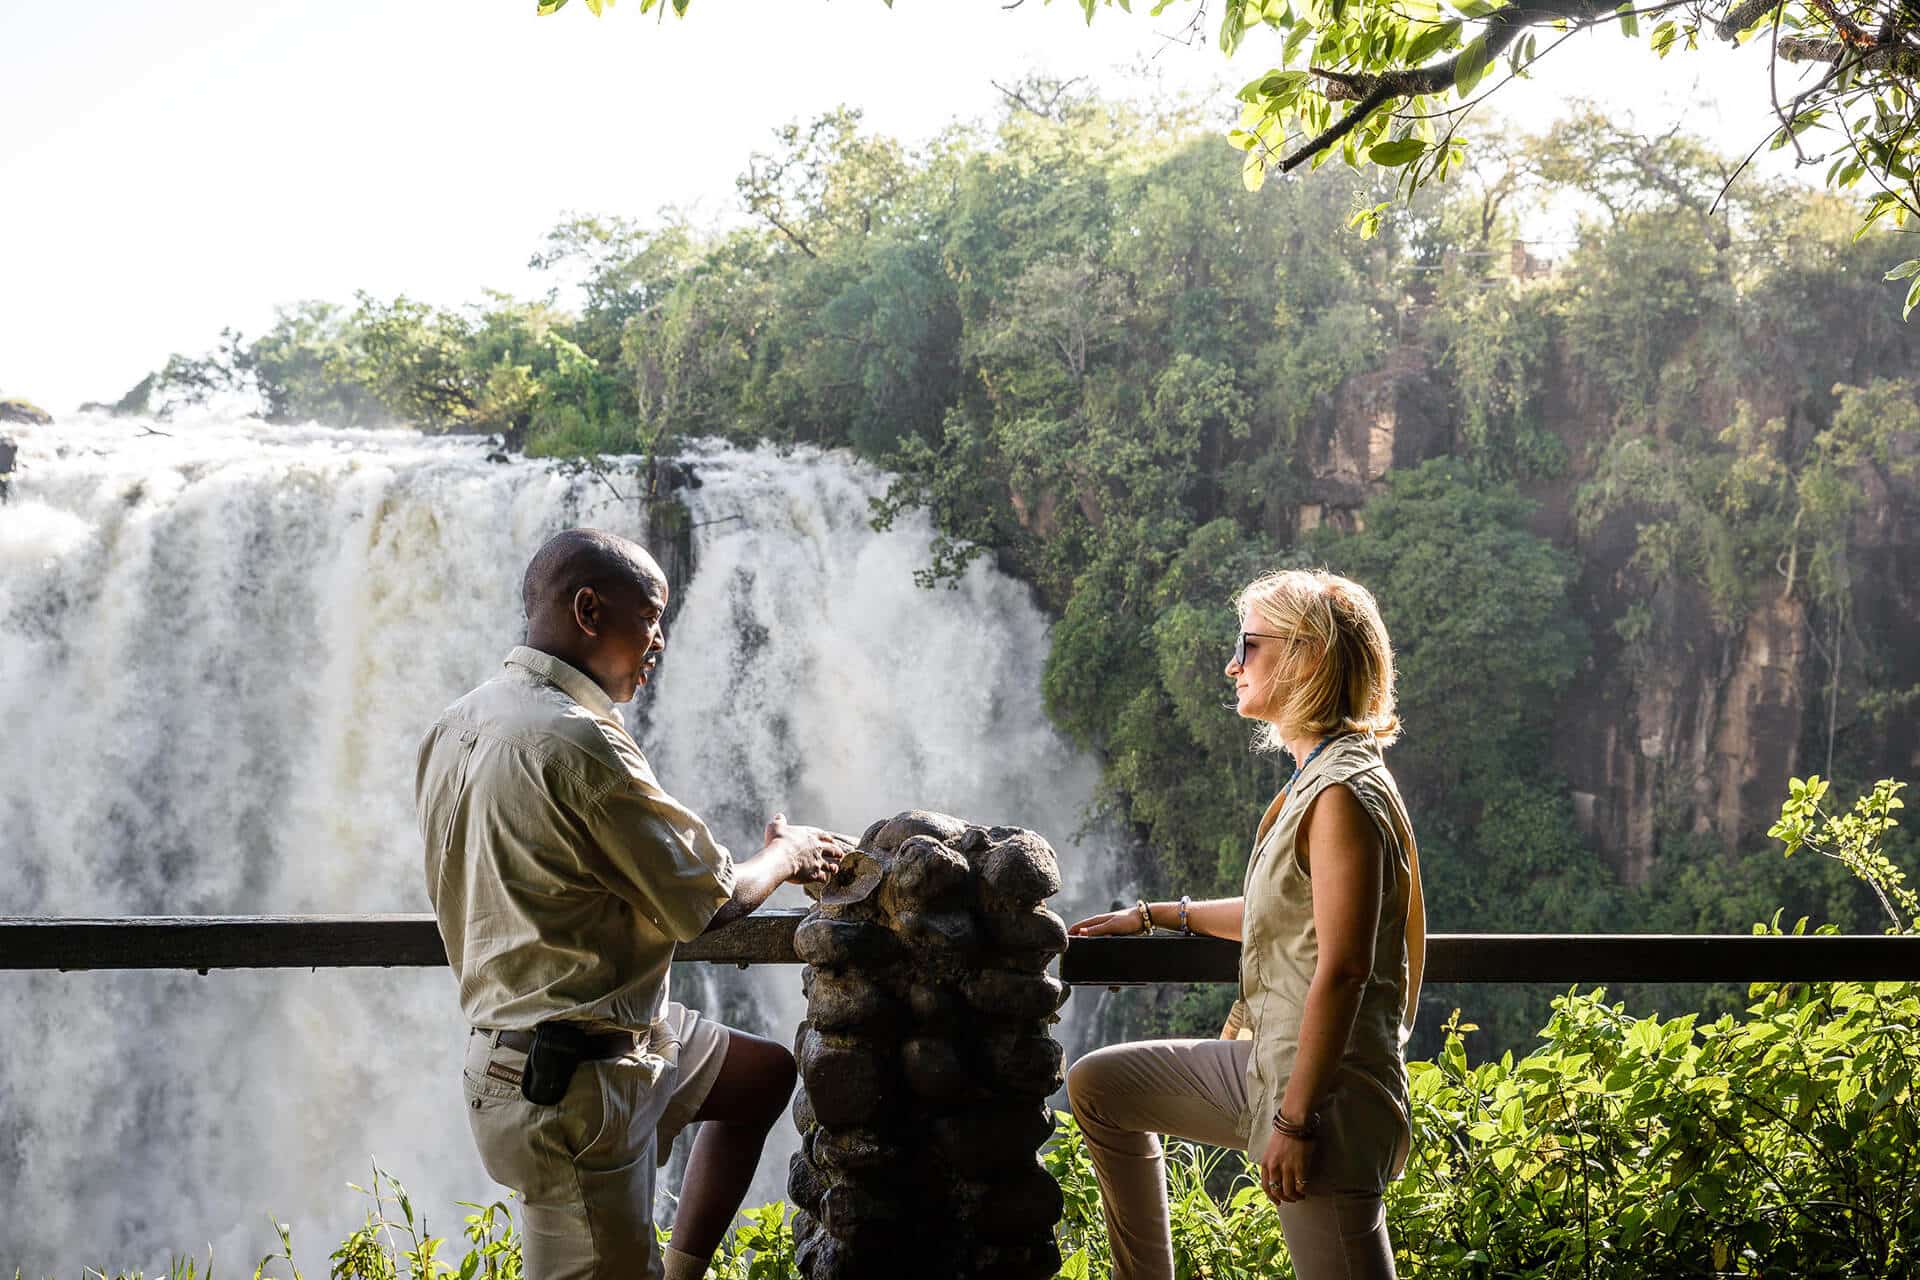 We recommend a guided tour of Victoria Falls while staying at one of the luxury safari villas in the area